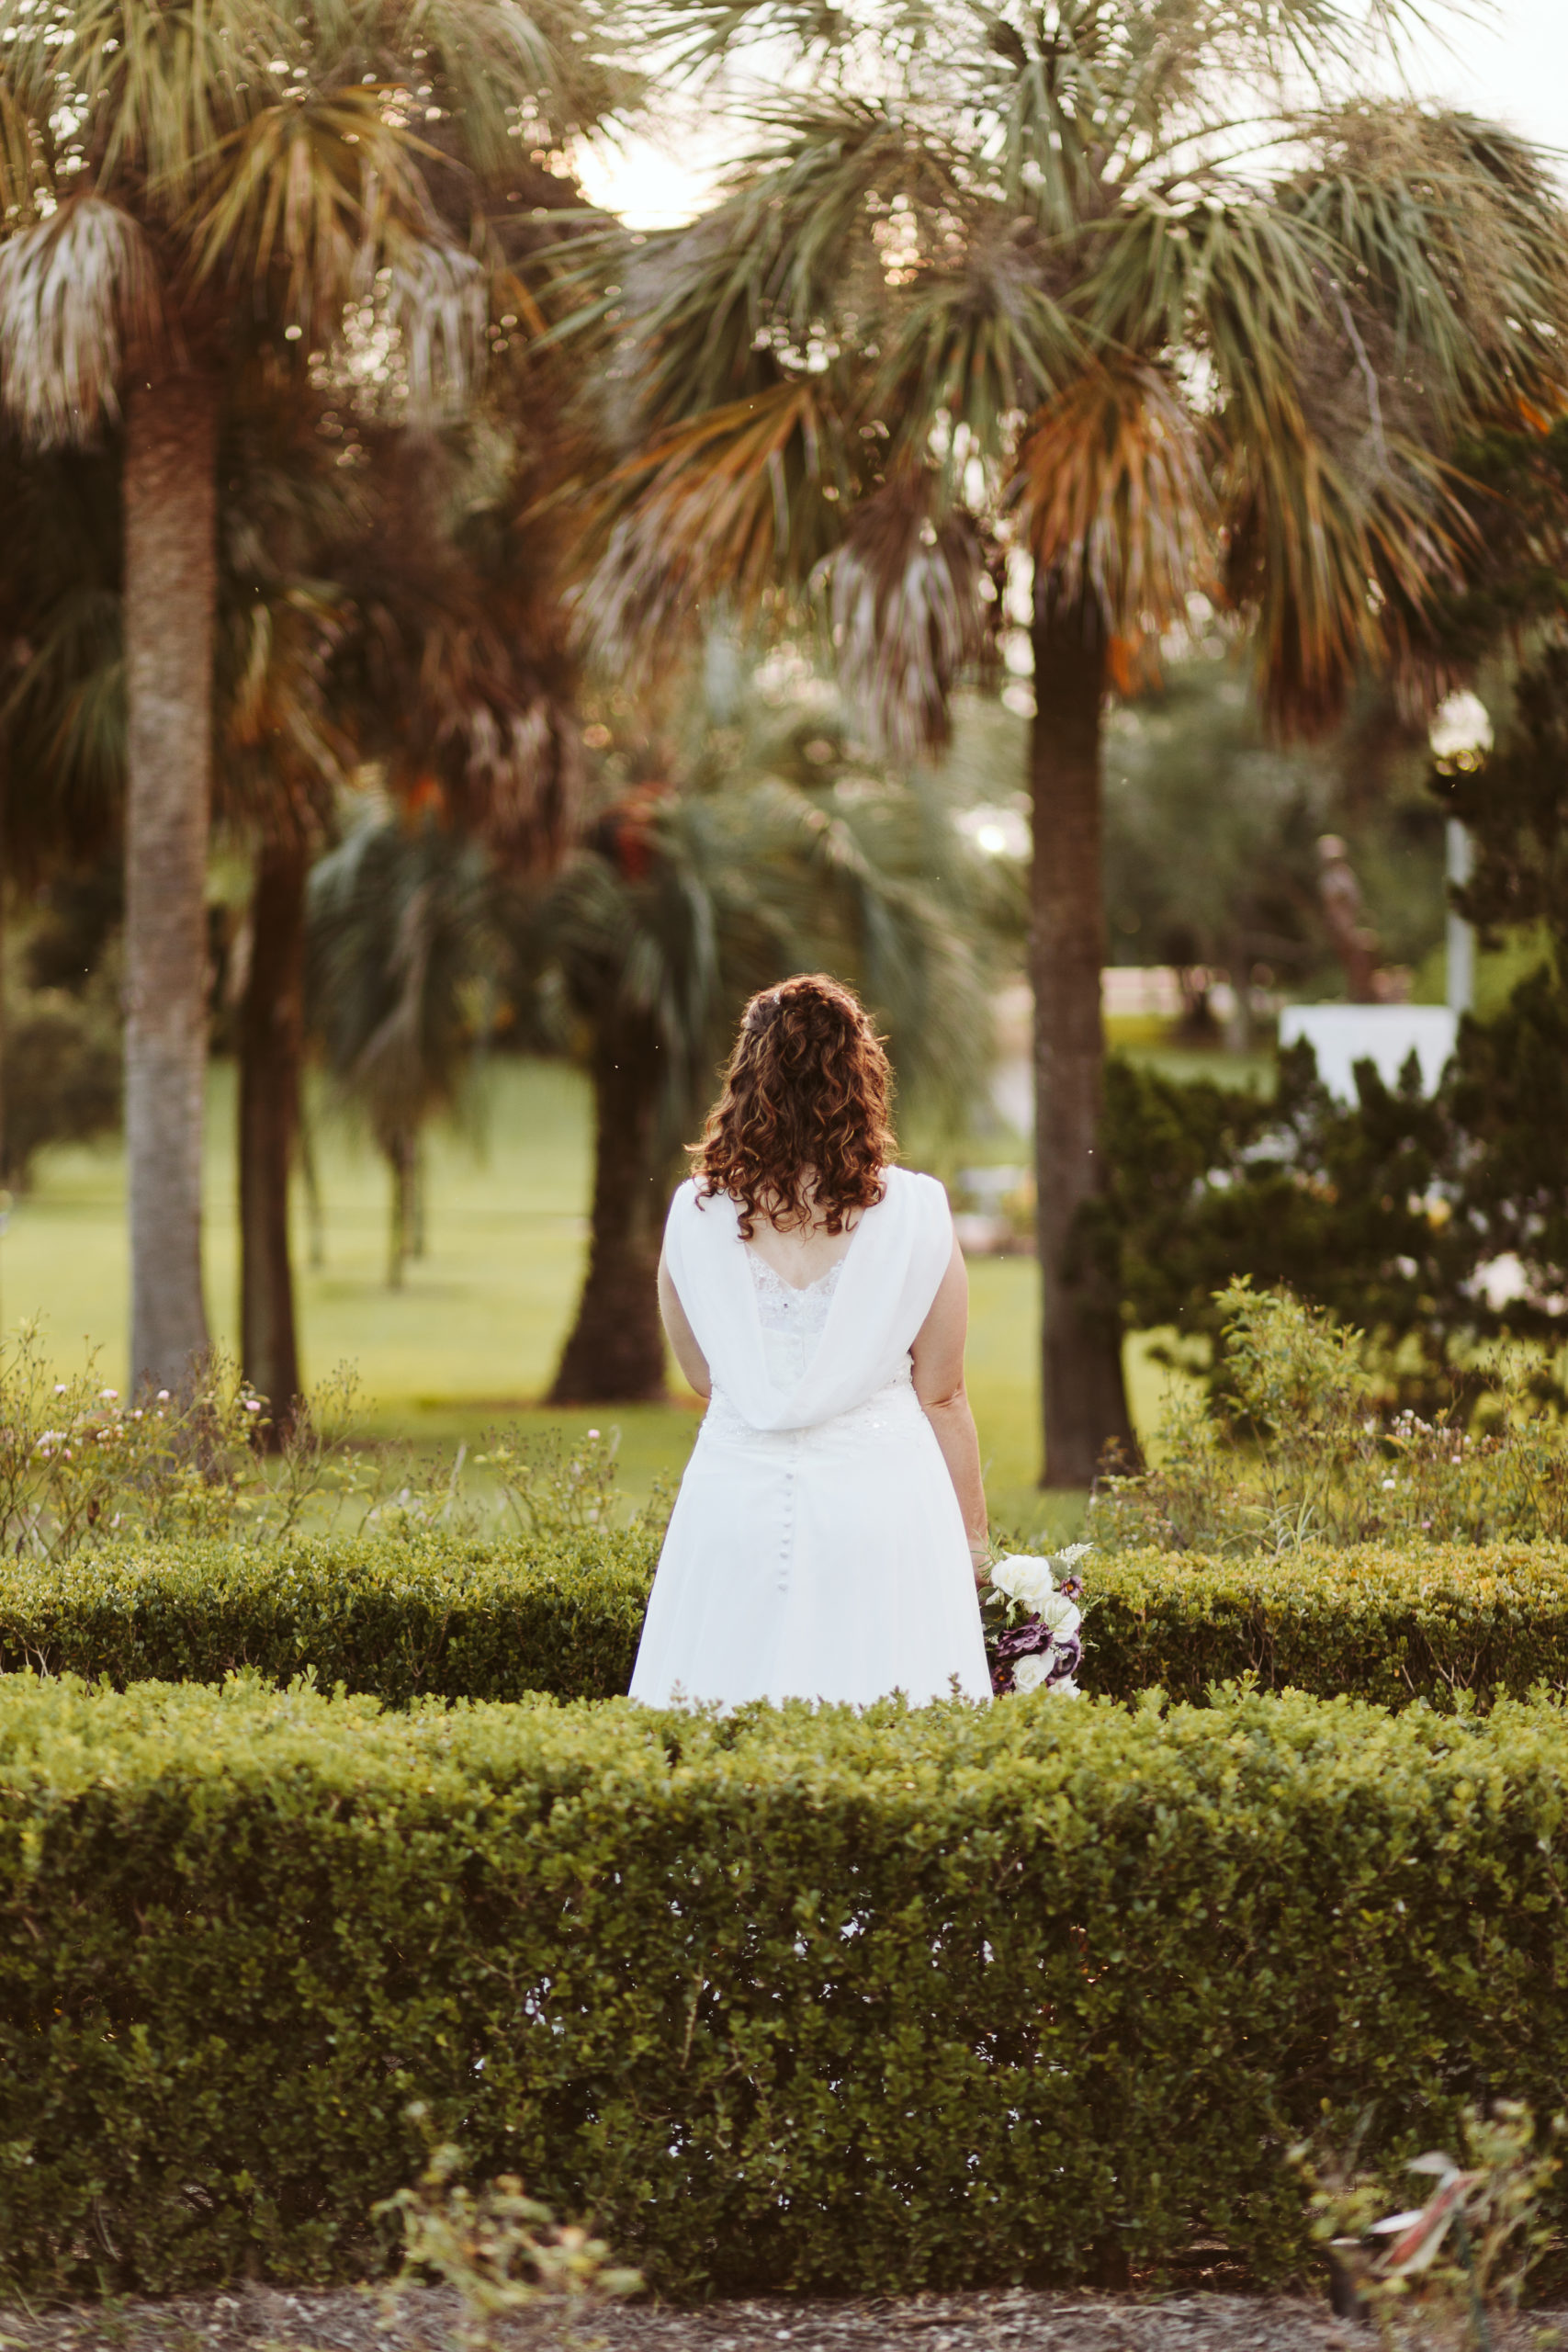 Outdoor Locations for Bridal Sessions